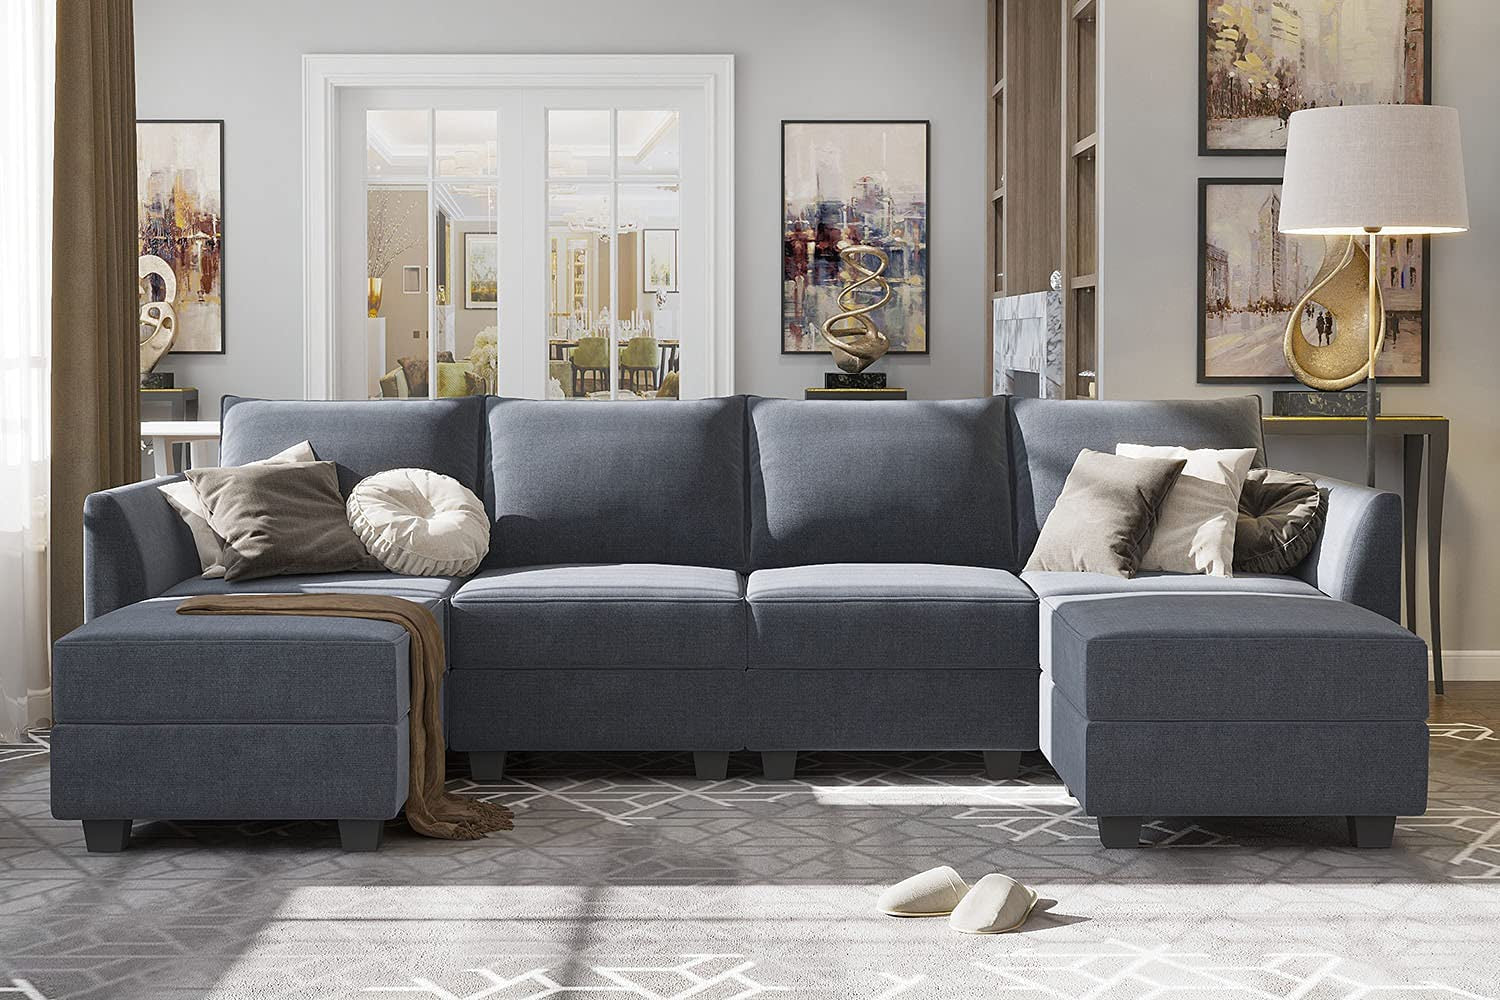 Modular Sectional Sofa U Shaped Couch with Reversible Chaise Modular Sofa Couch with Storage Seats, Bluish Grey - Growing Apex Home, Sweet Home